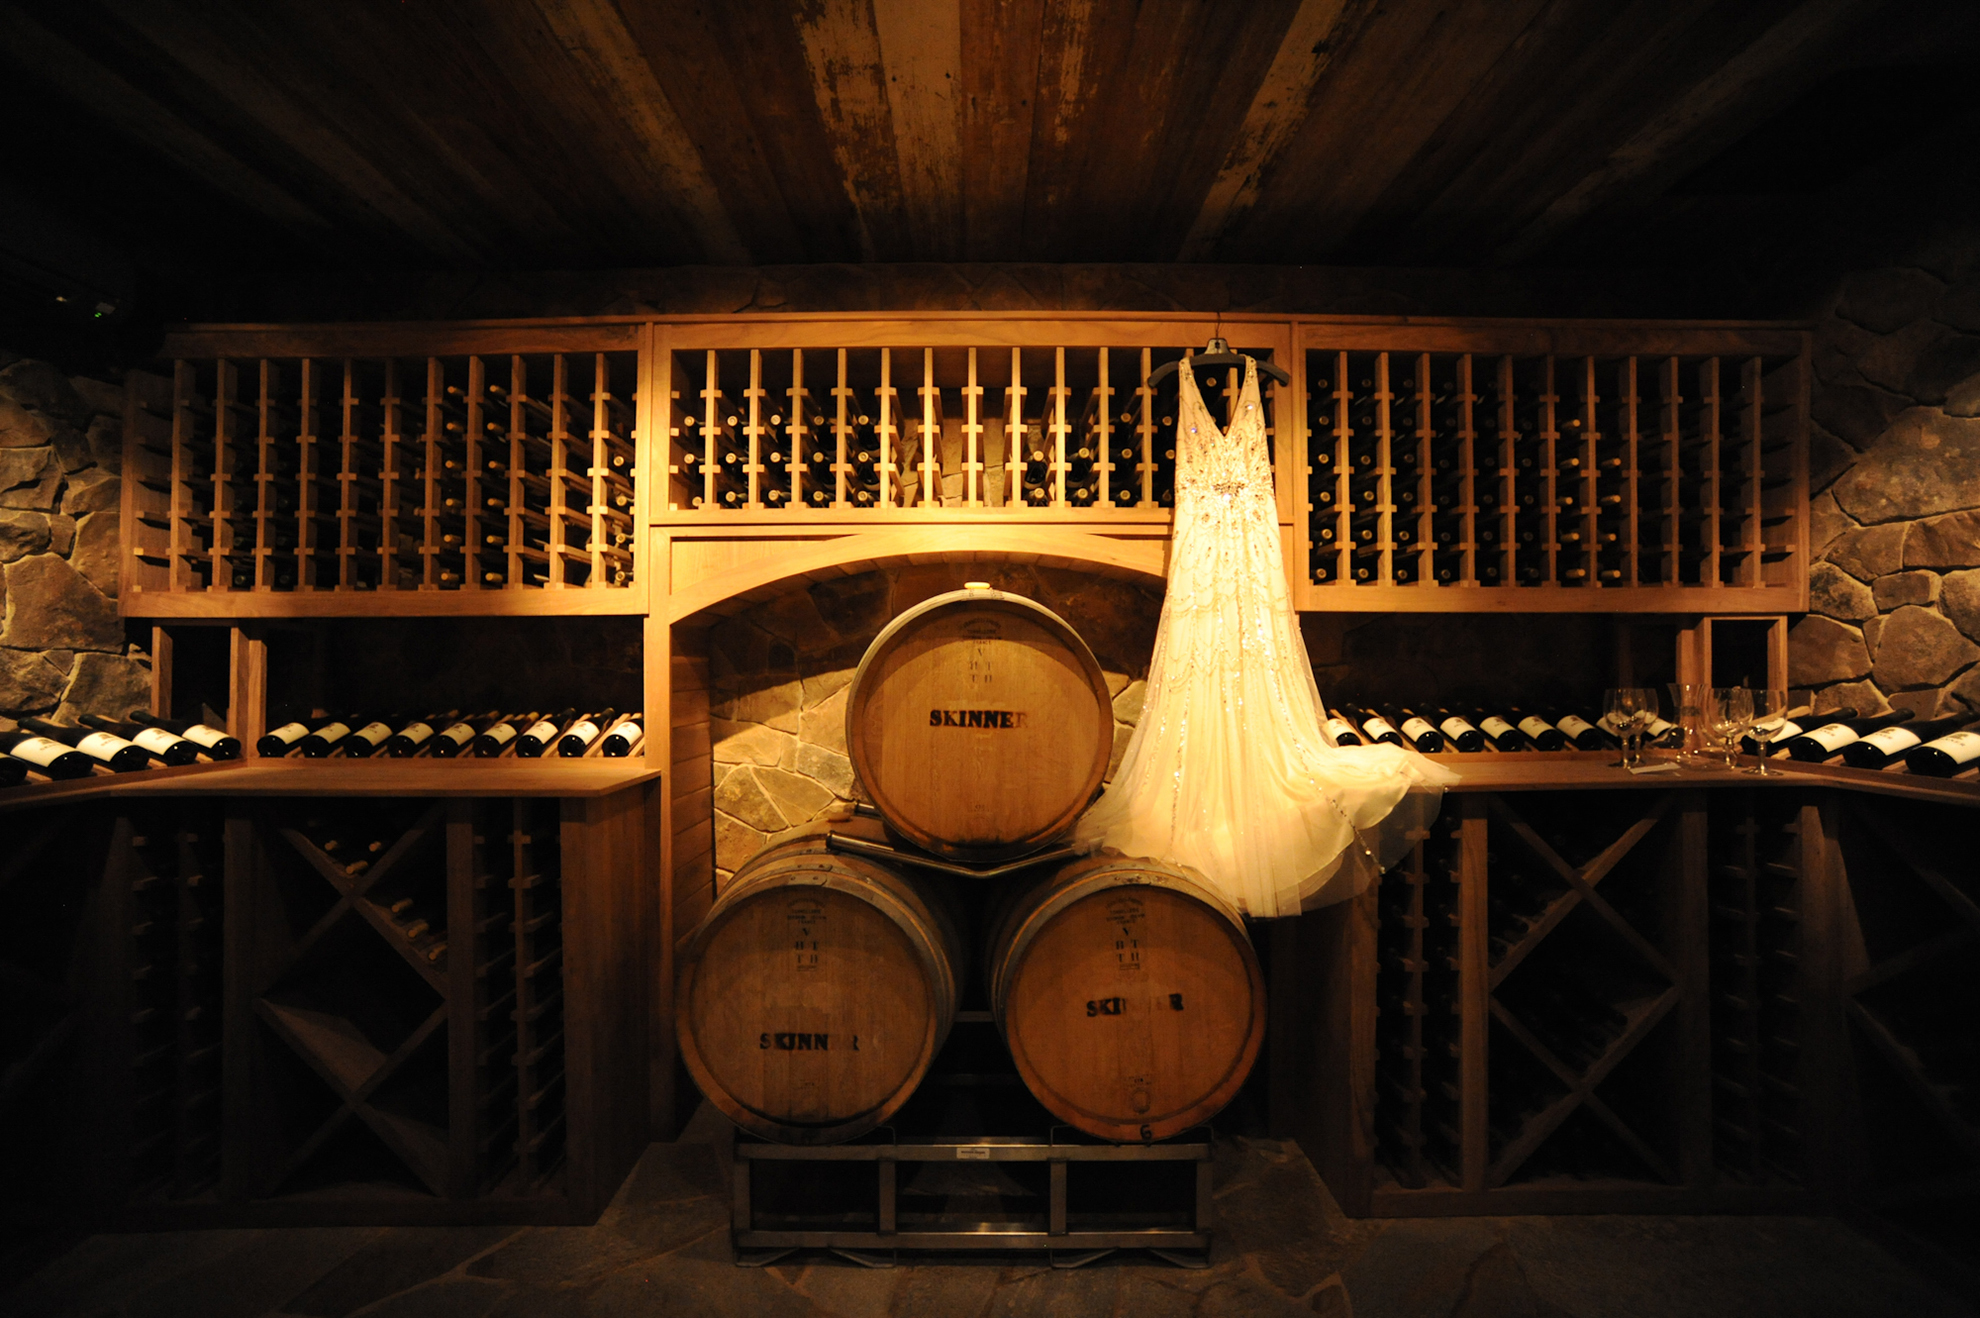 wine barrels and wine bottles in a cellar with the wedding dress hanging beside them